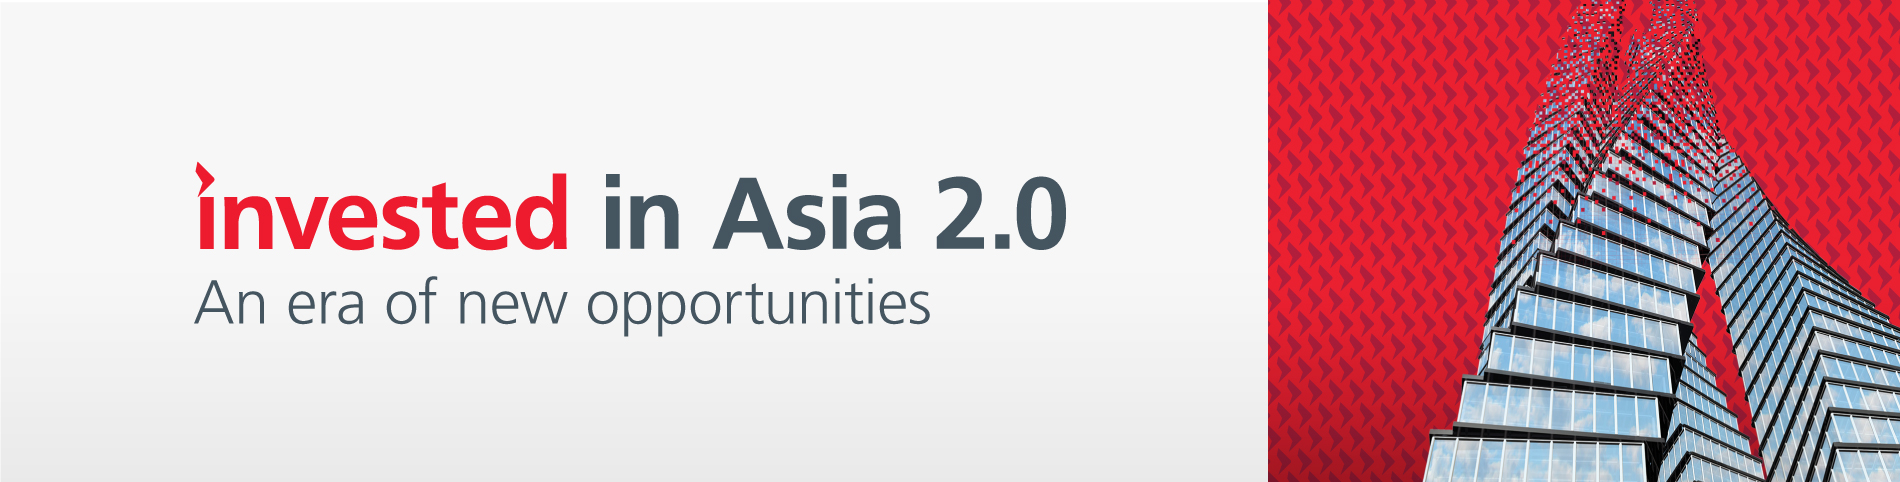 Eastspring Asia Whitepaper, investing in Asia